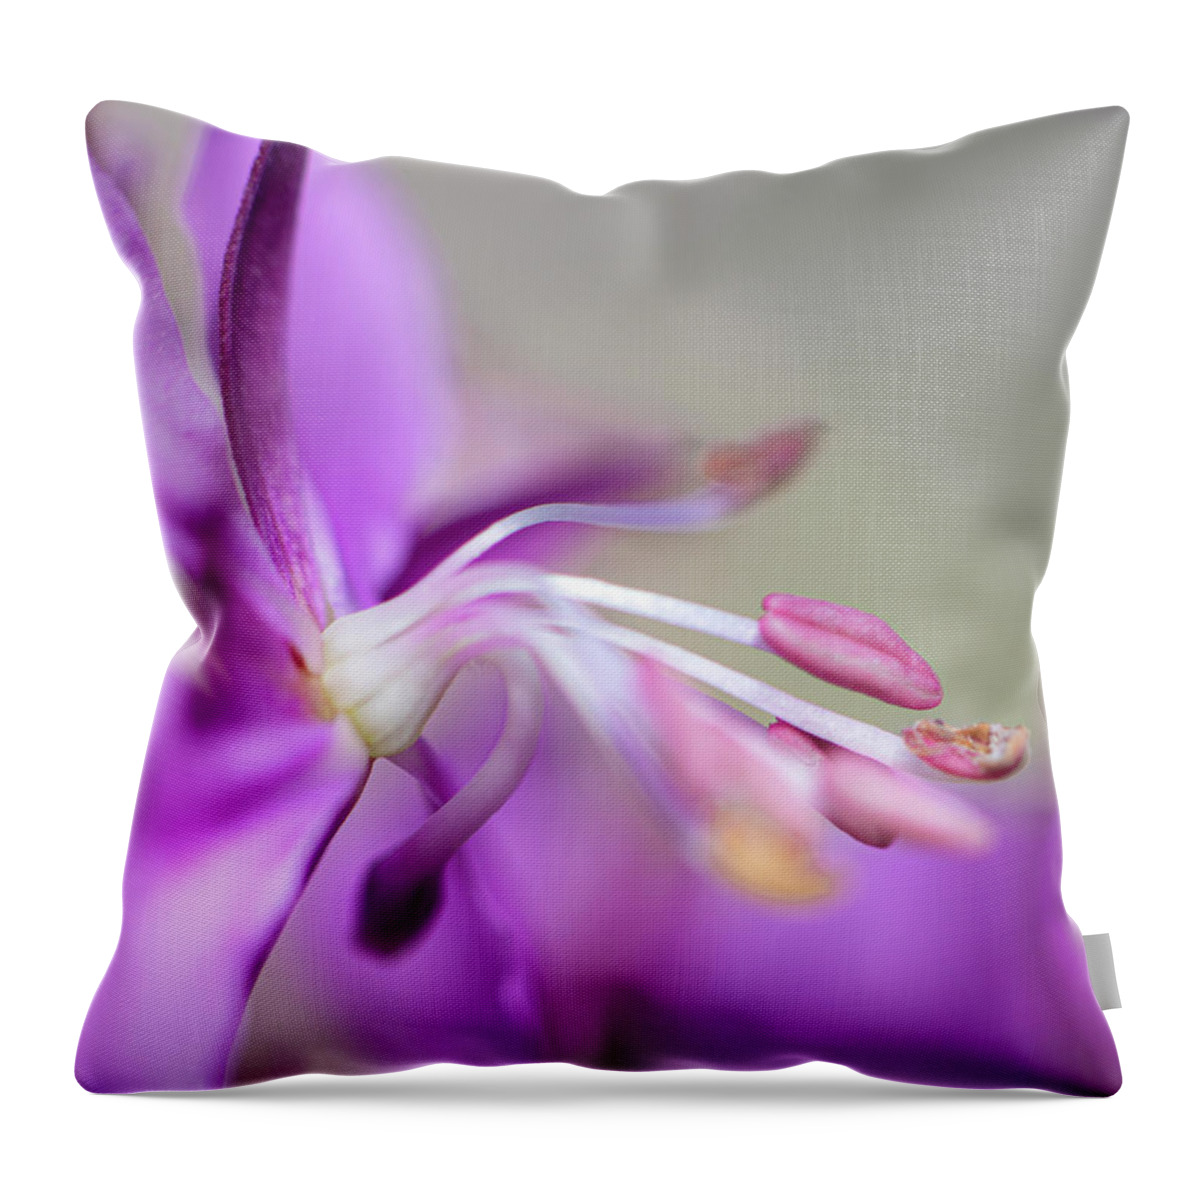 Fireweed Throw Pillow featuring the photograph Fireweed Close Up by Karen Rispin